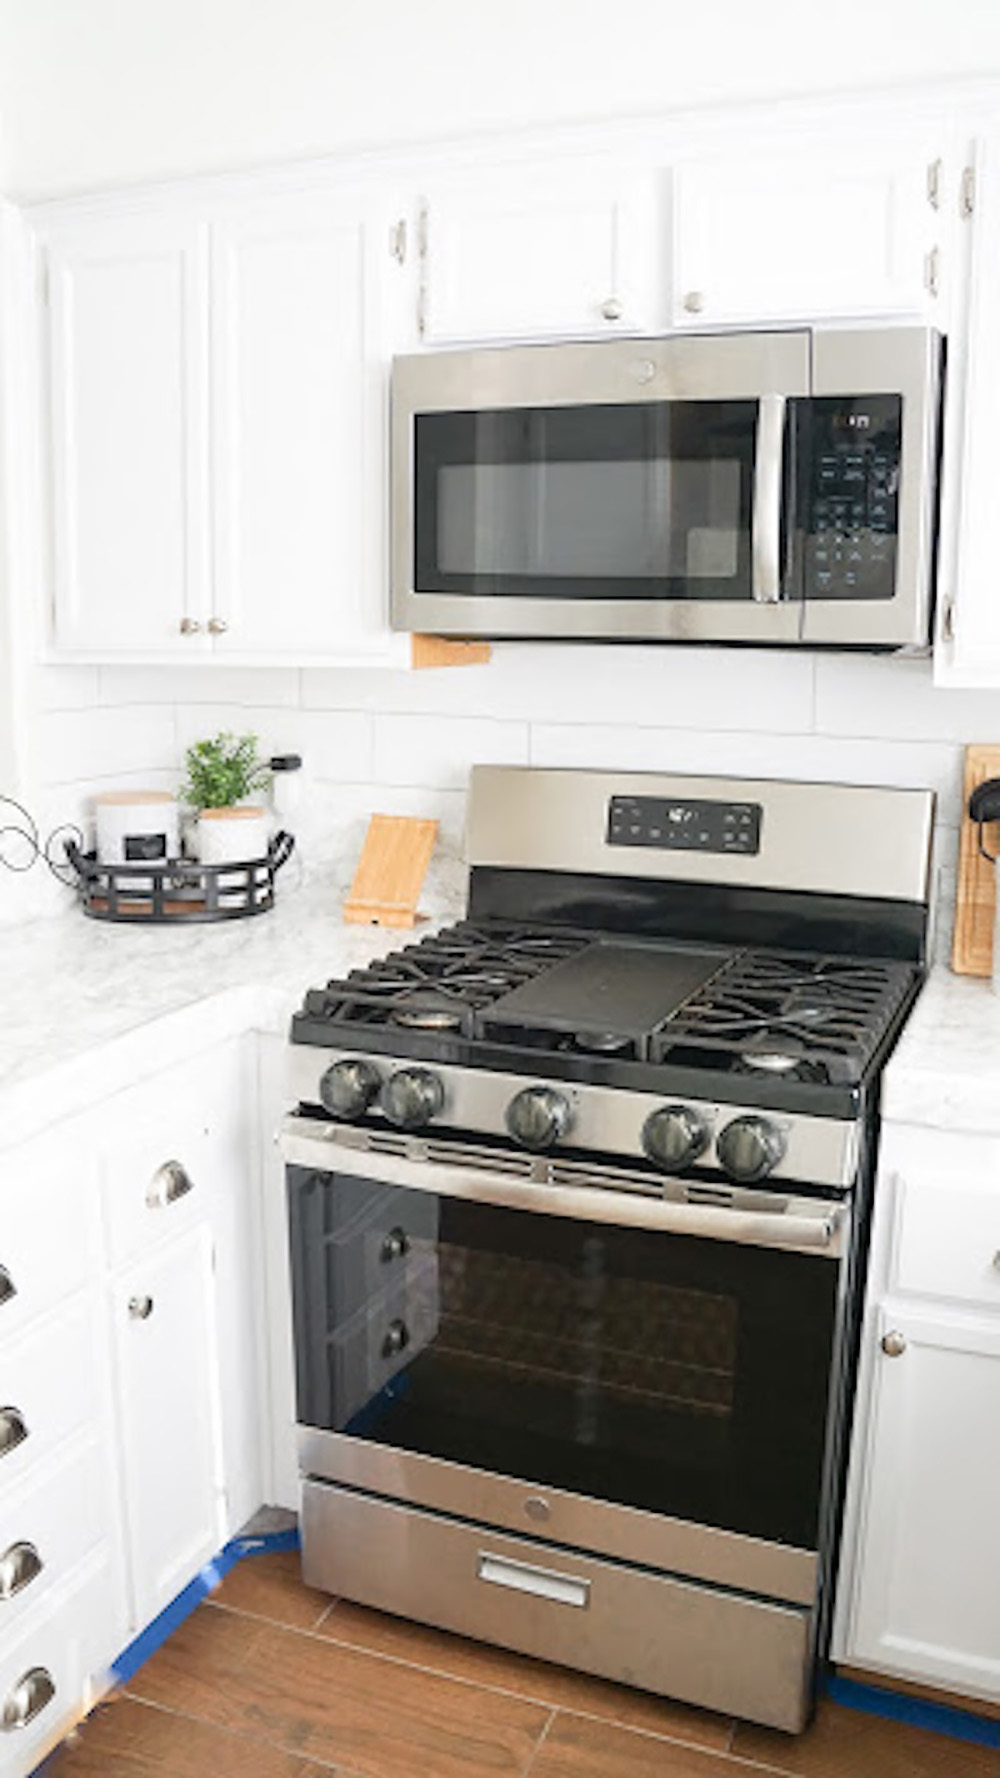 A kitchen backsplash is updated with a white subway tile looking removable wallpaper.